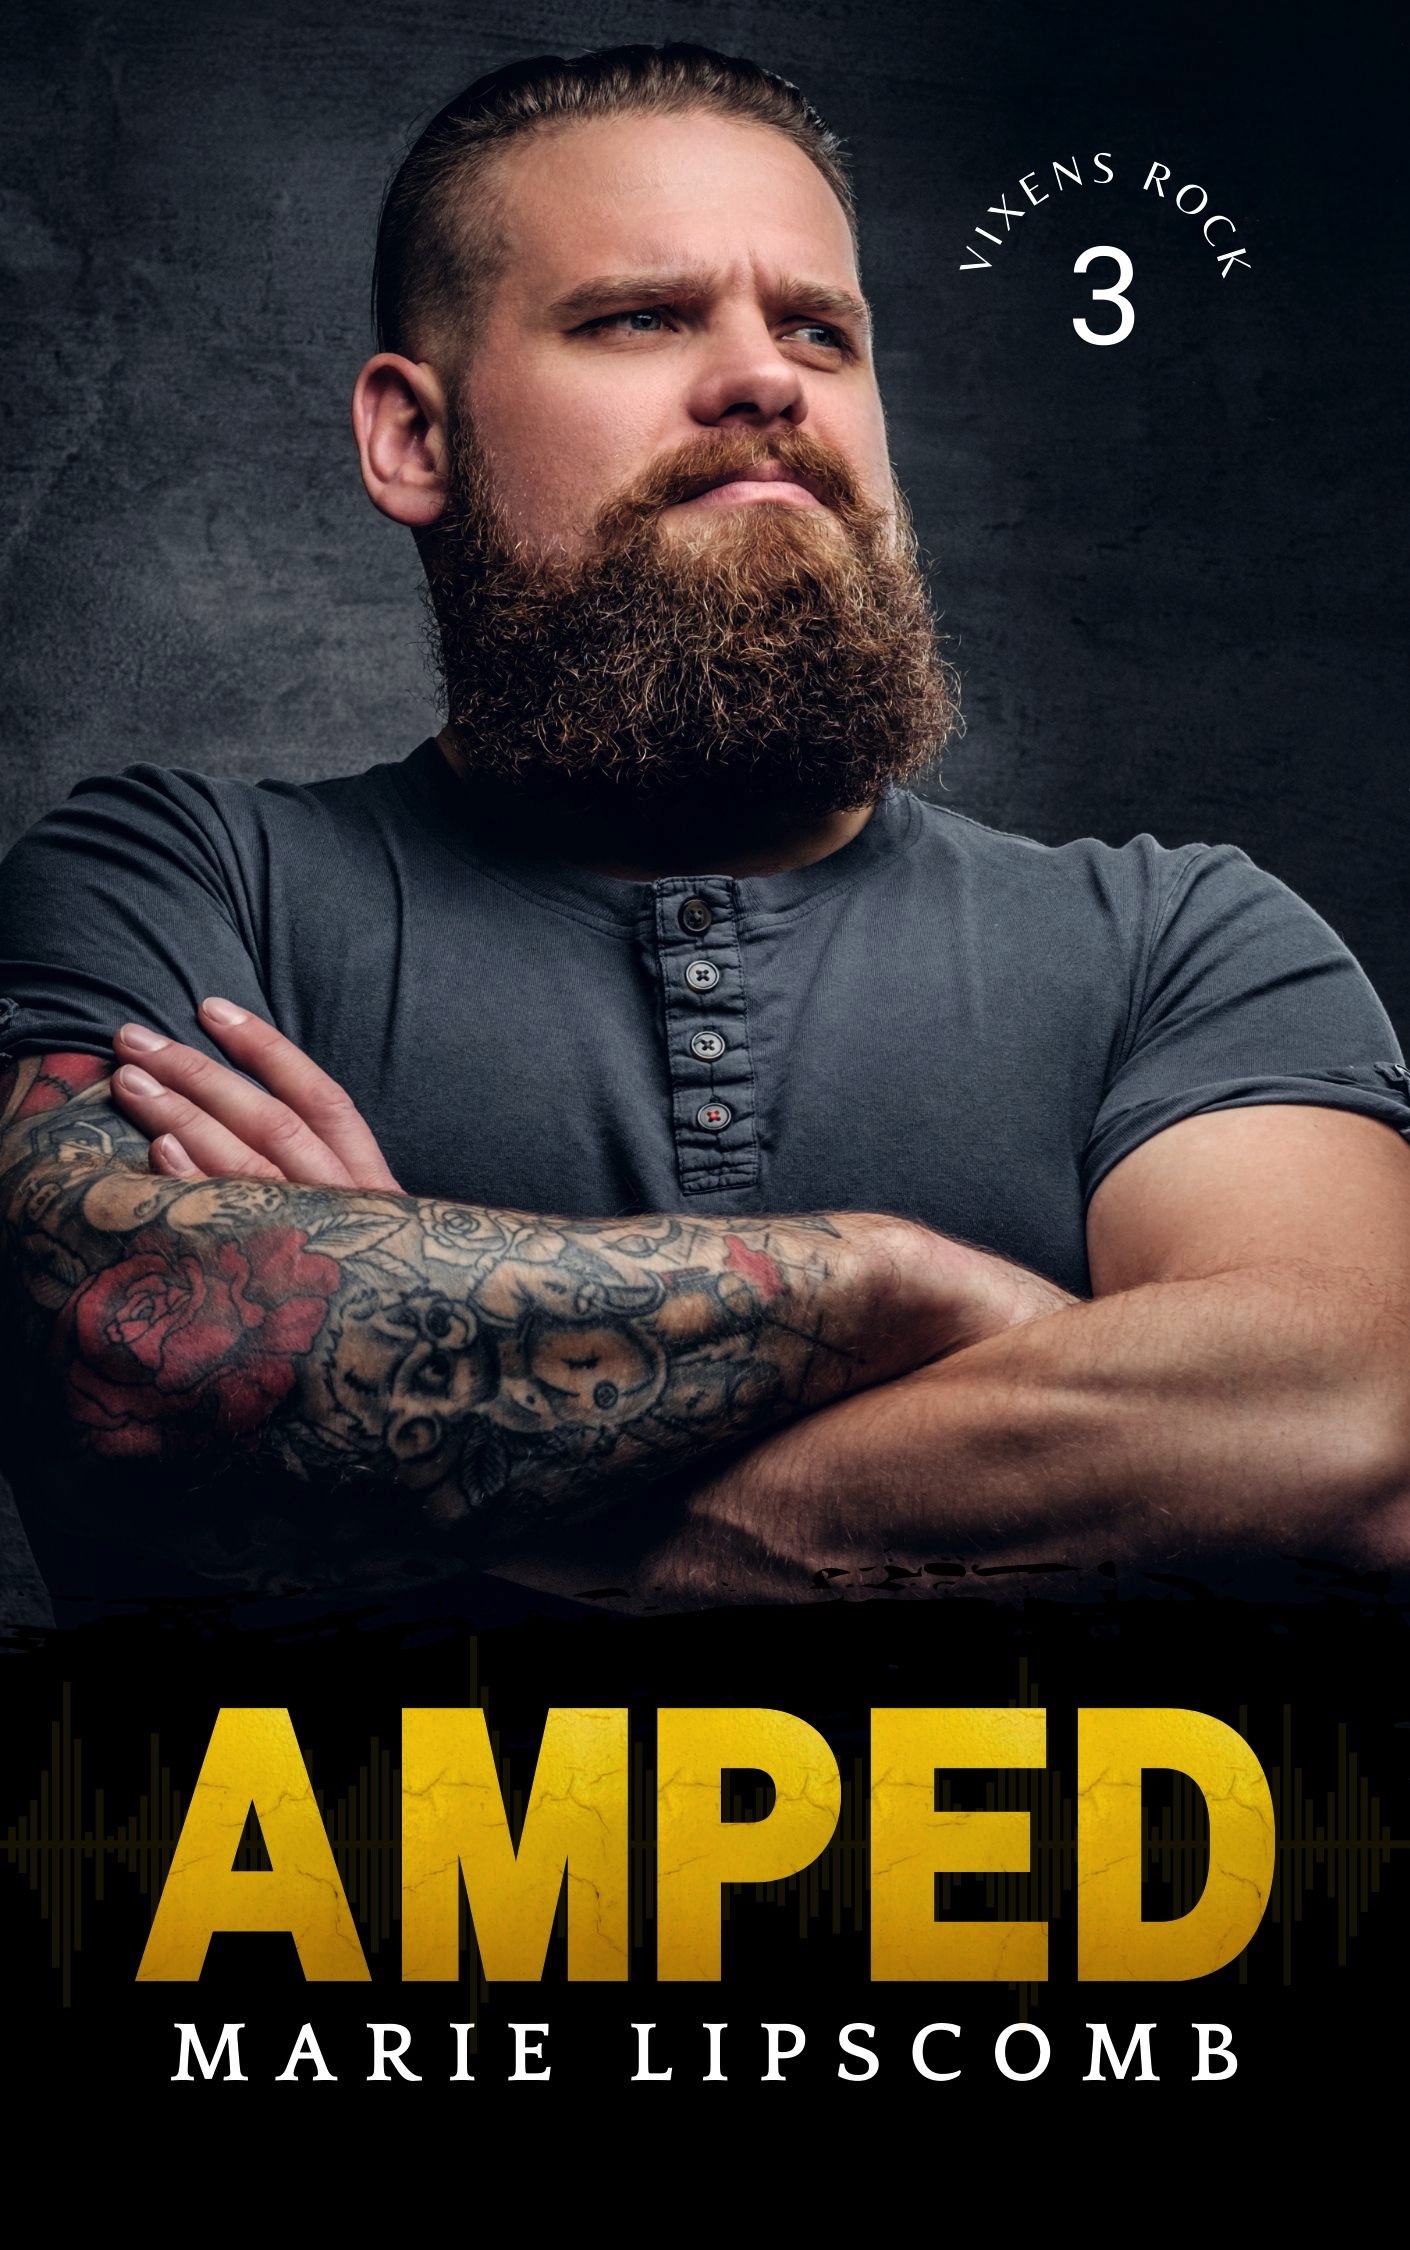 Amped by Marie Lipscomb